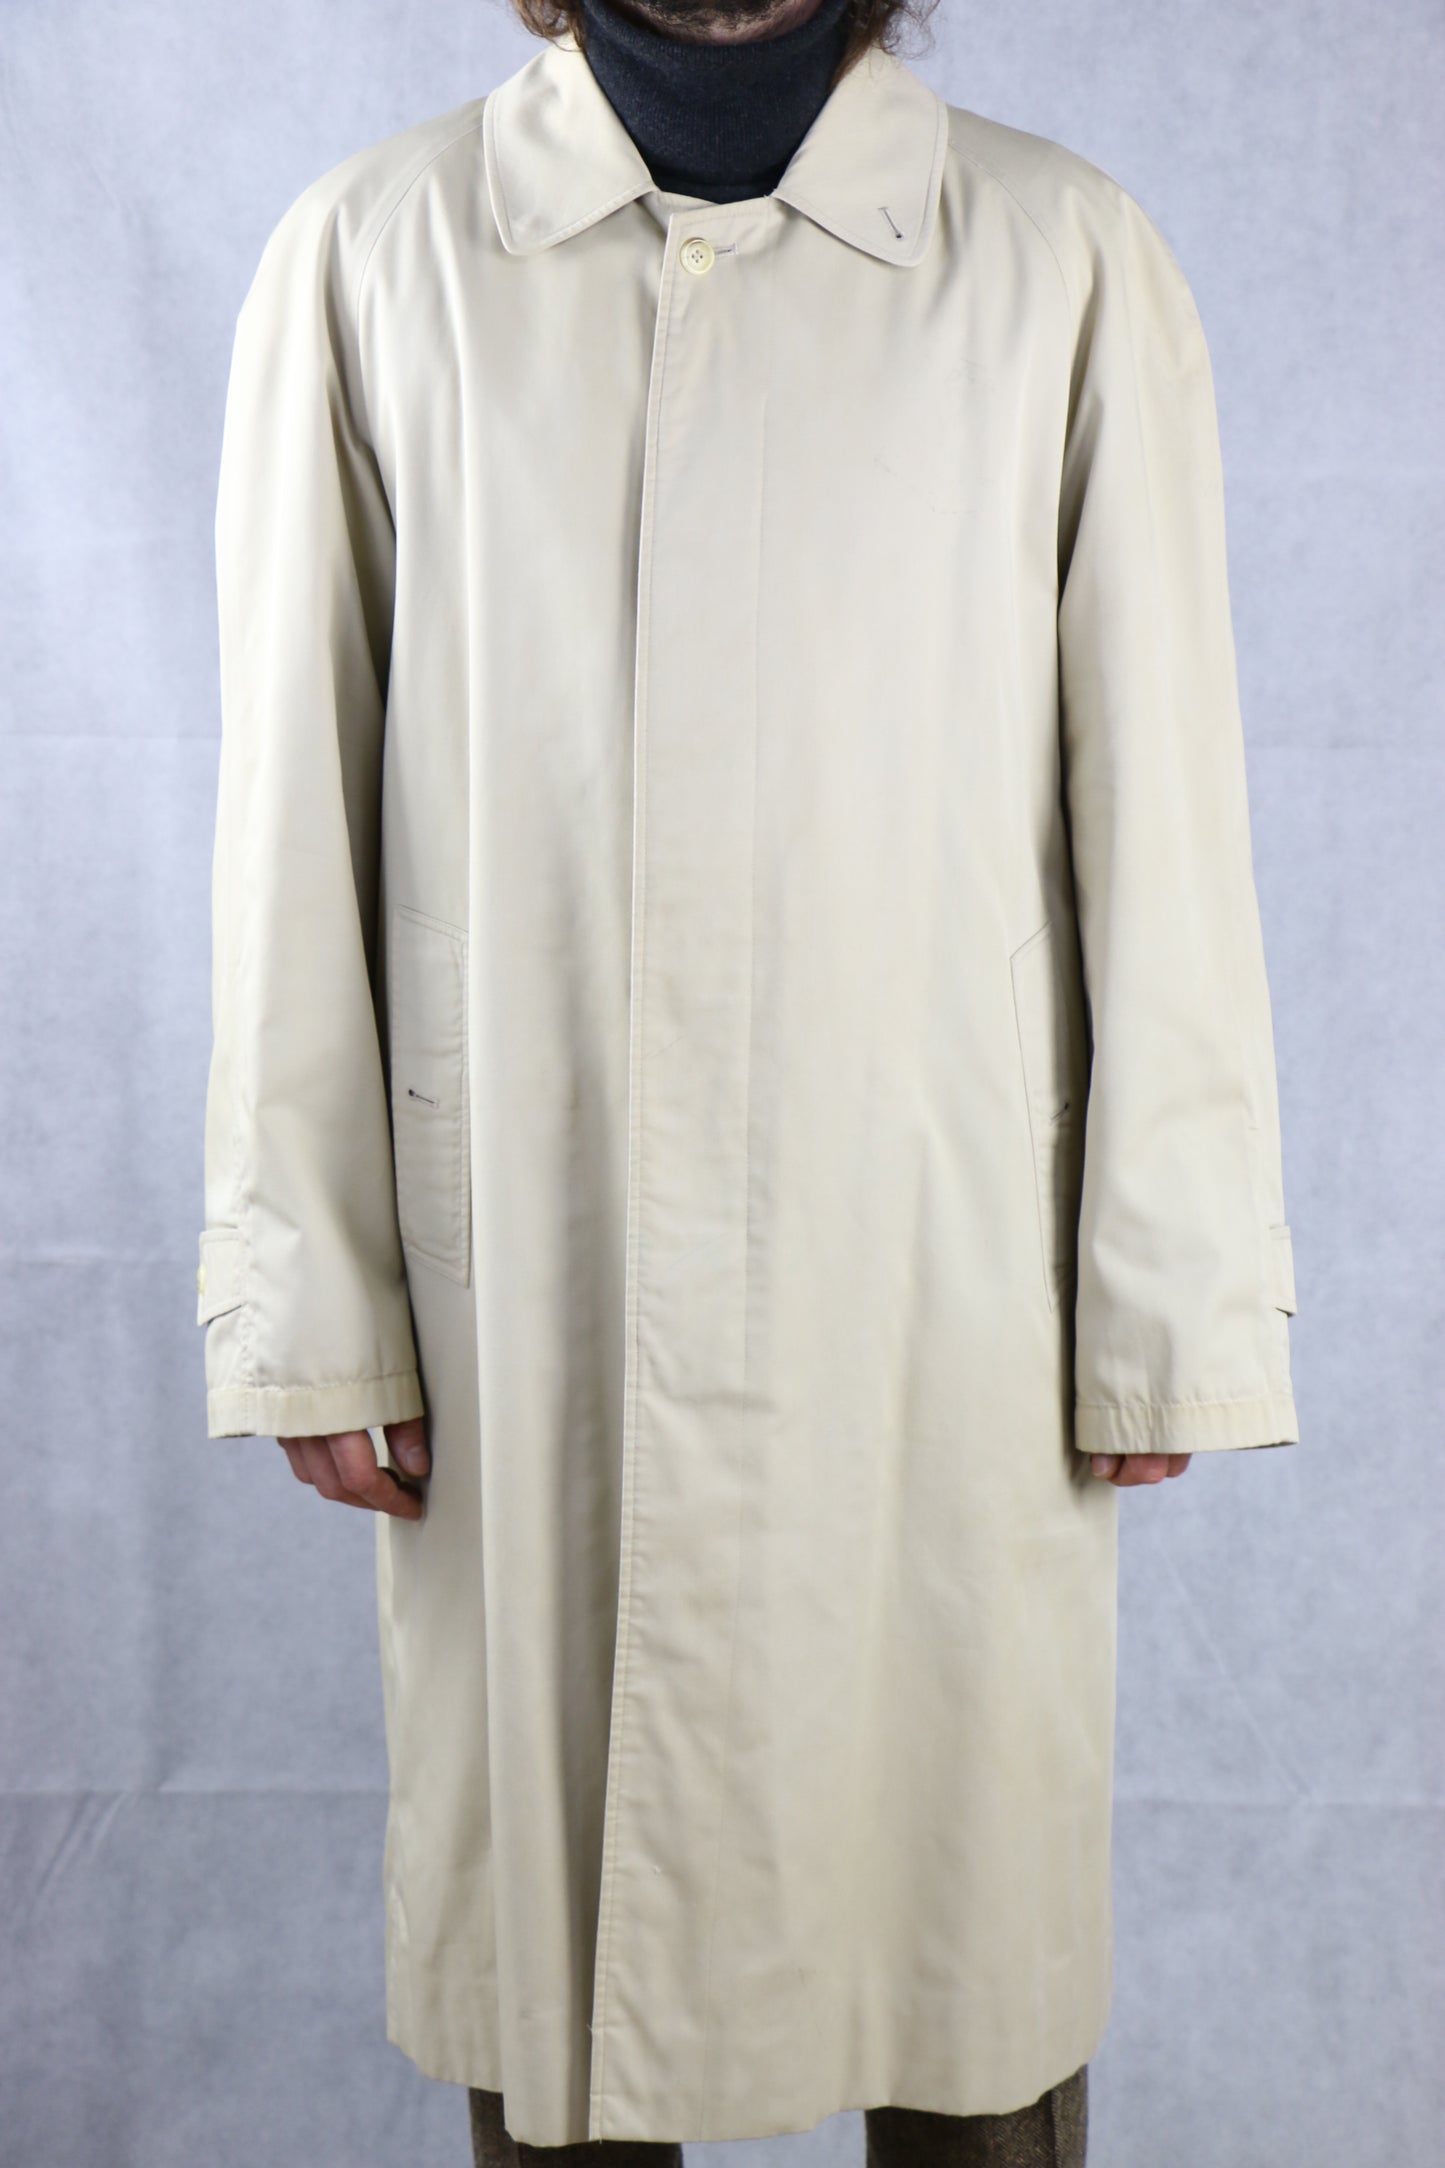 Burberry's Trench Coat 'L' Made in England, clochard92.com